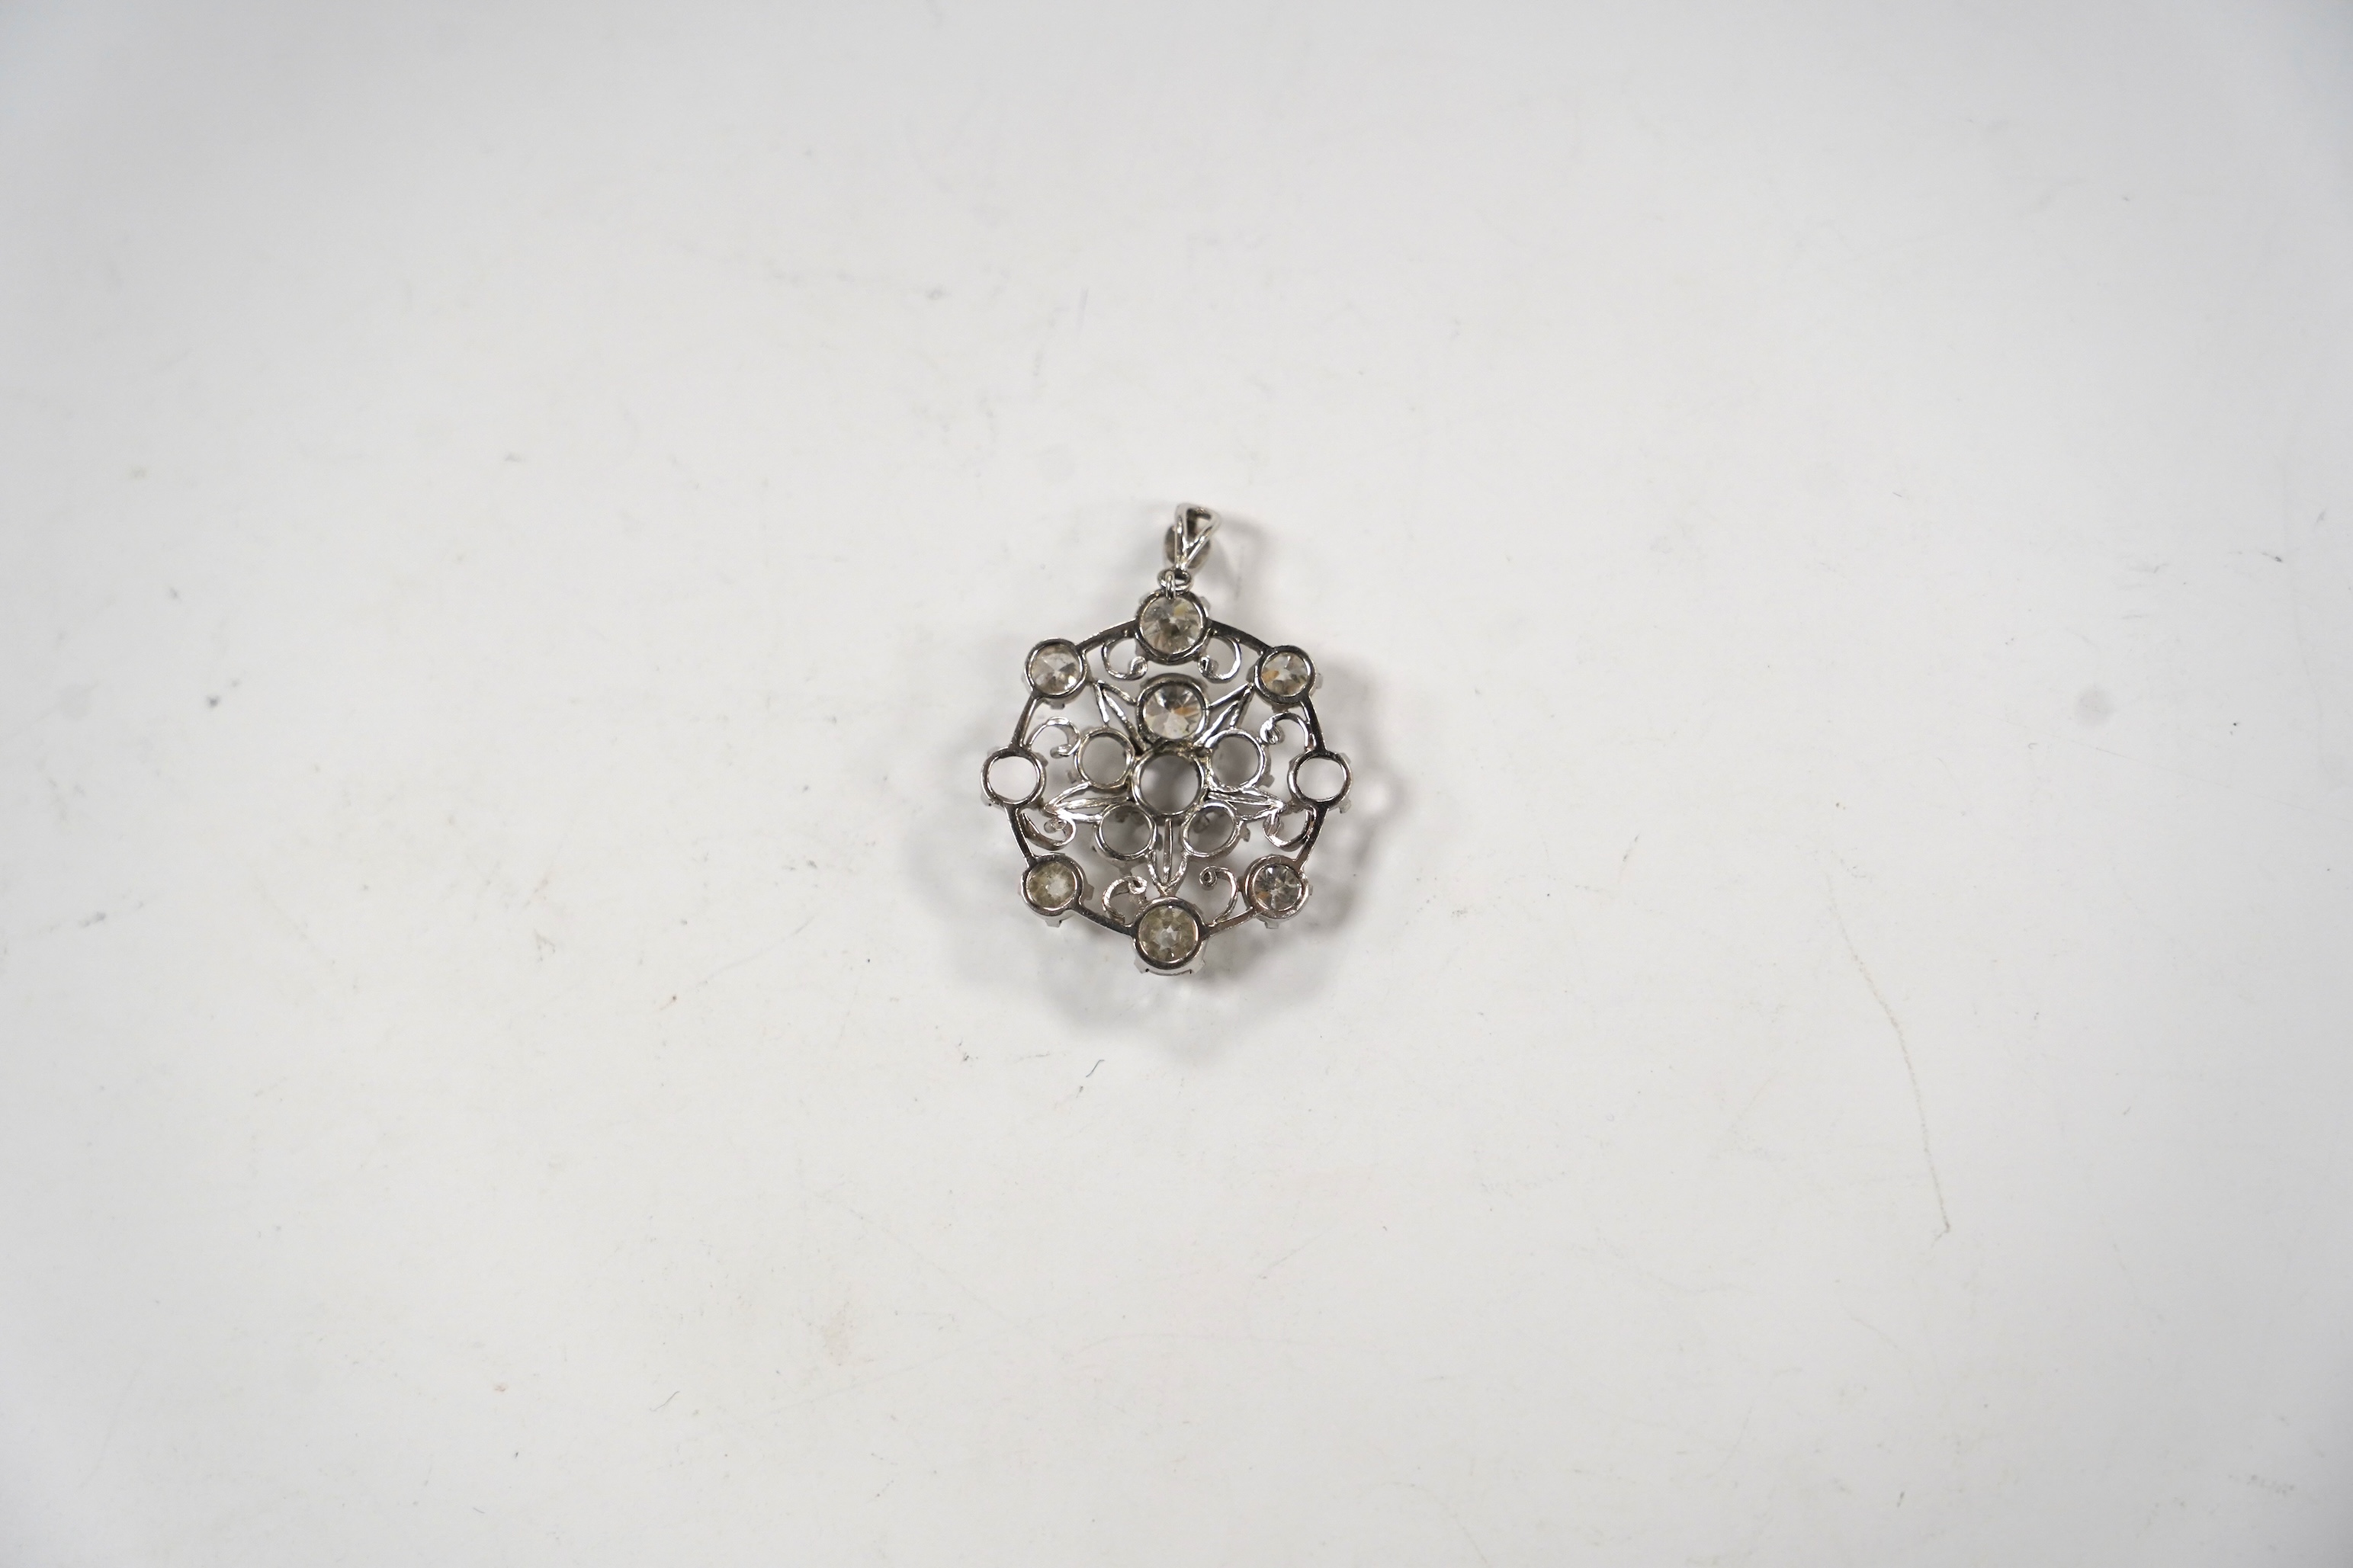 A white metal and diamond cluster set circular pendant (seven stones missing), largest stone diameter approx. 5.6mm, overall 35mm, gross weight 6 grams.